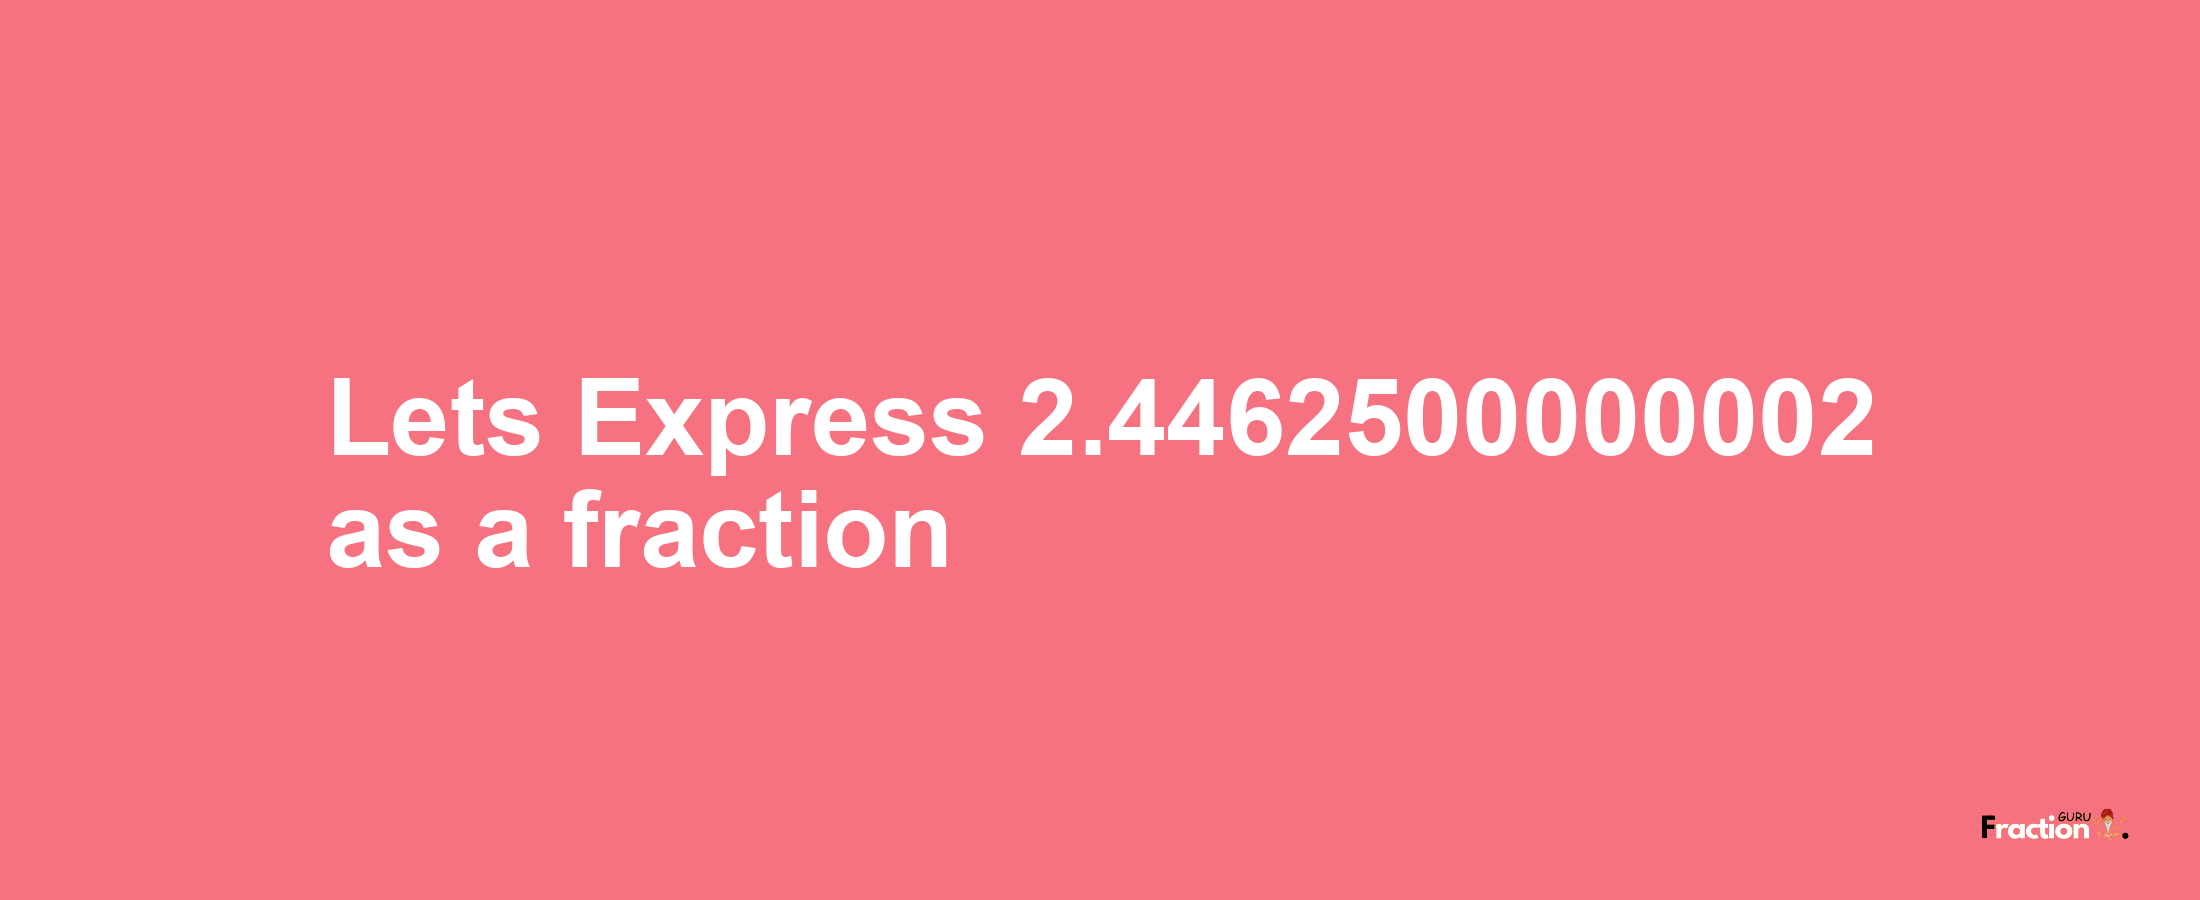 Lets Express 2.4462500000002 as afraction